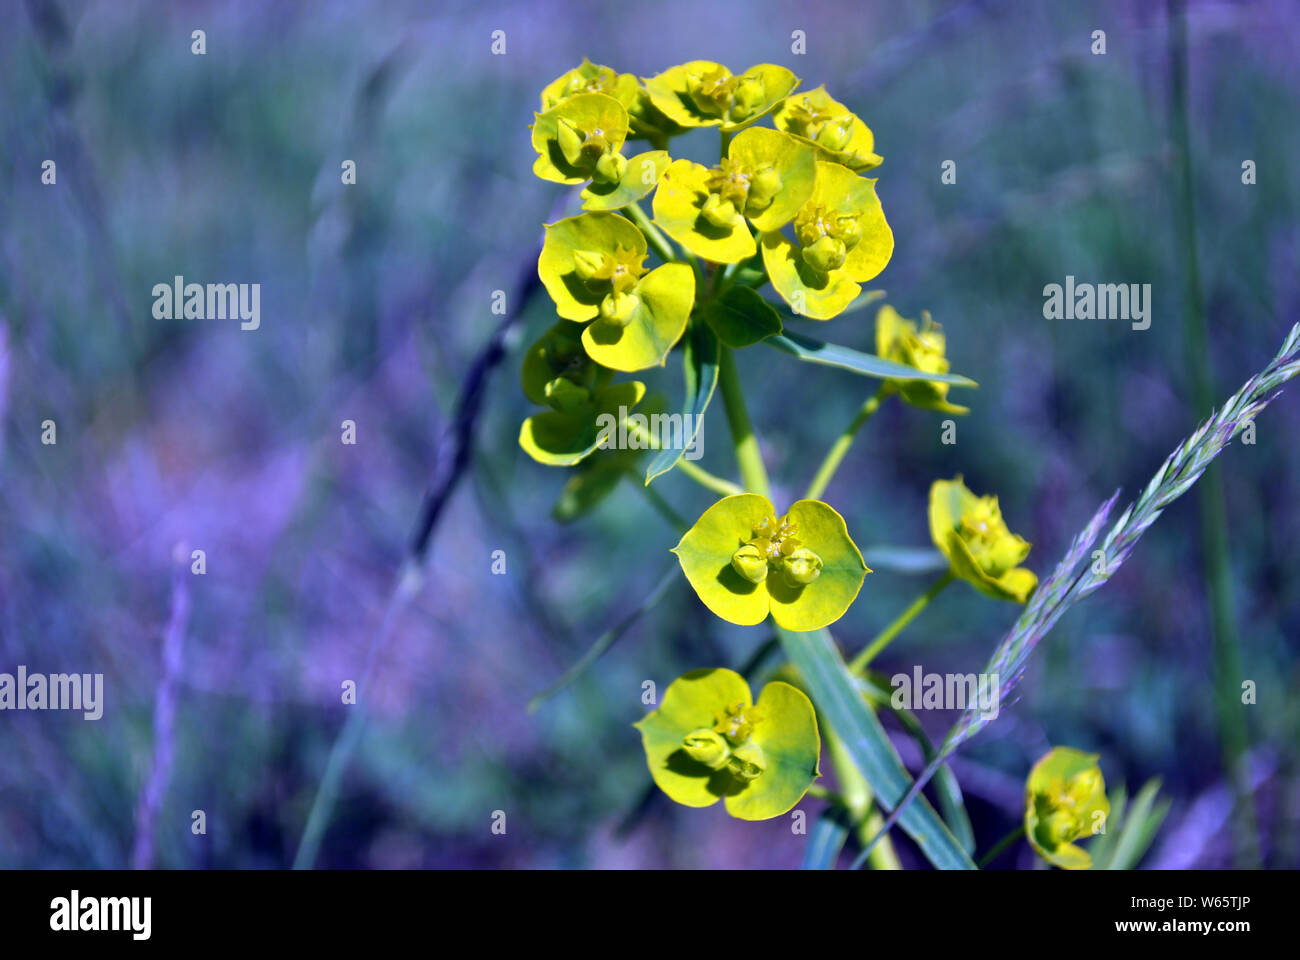 Euphorbia esula (green or leafy spurge) blooming flowers  on grassy meadow close up macro detail, blurry background Stock Photo